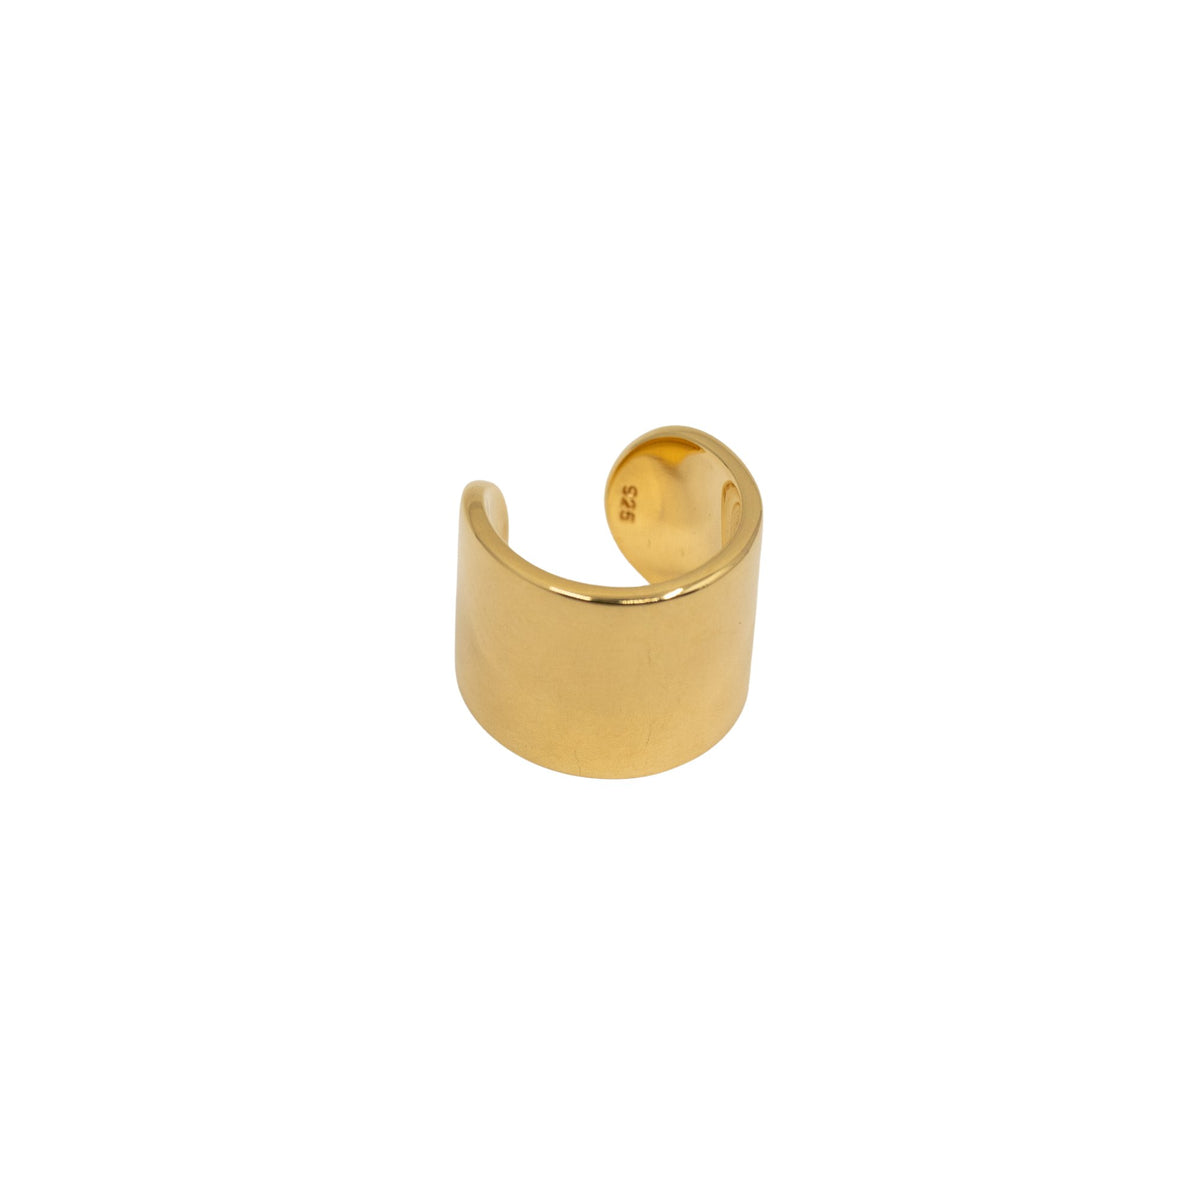 Yellow Gold Ear Cuffs Thick Ear Cuff The Curated Lobeconchno piercing